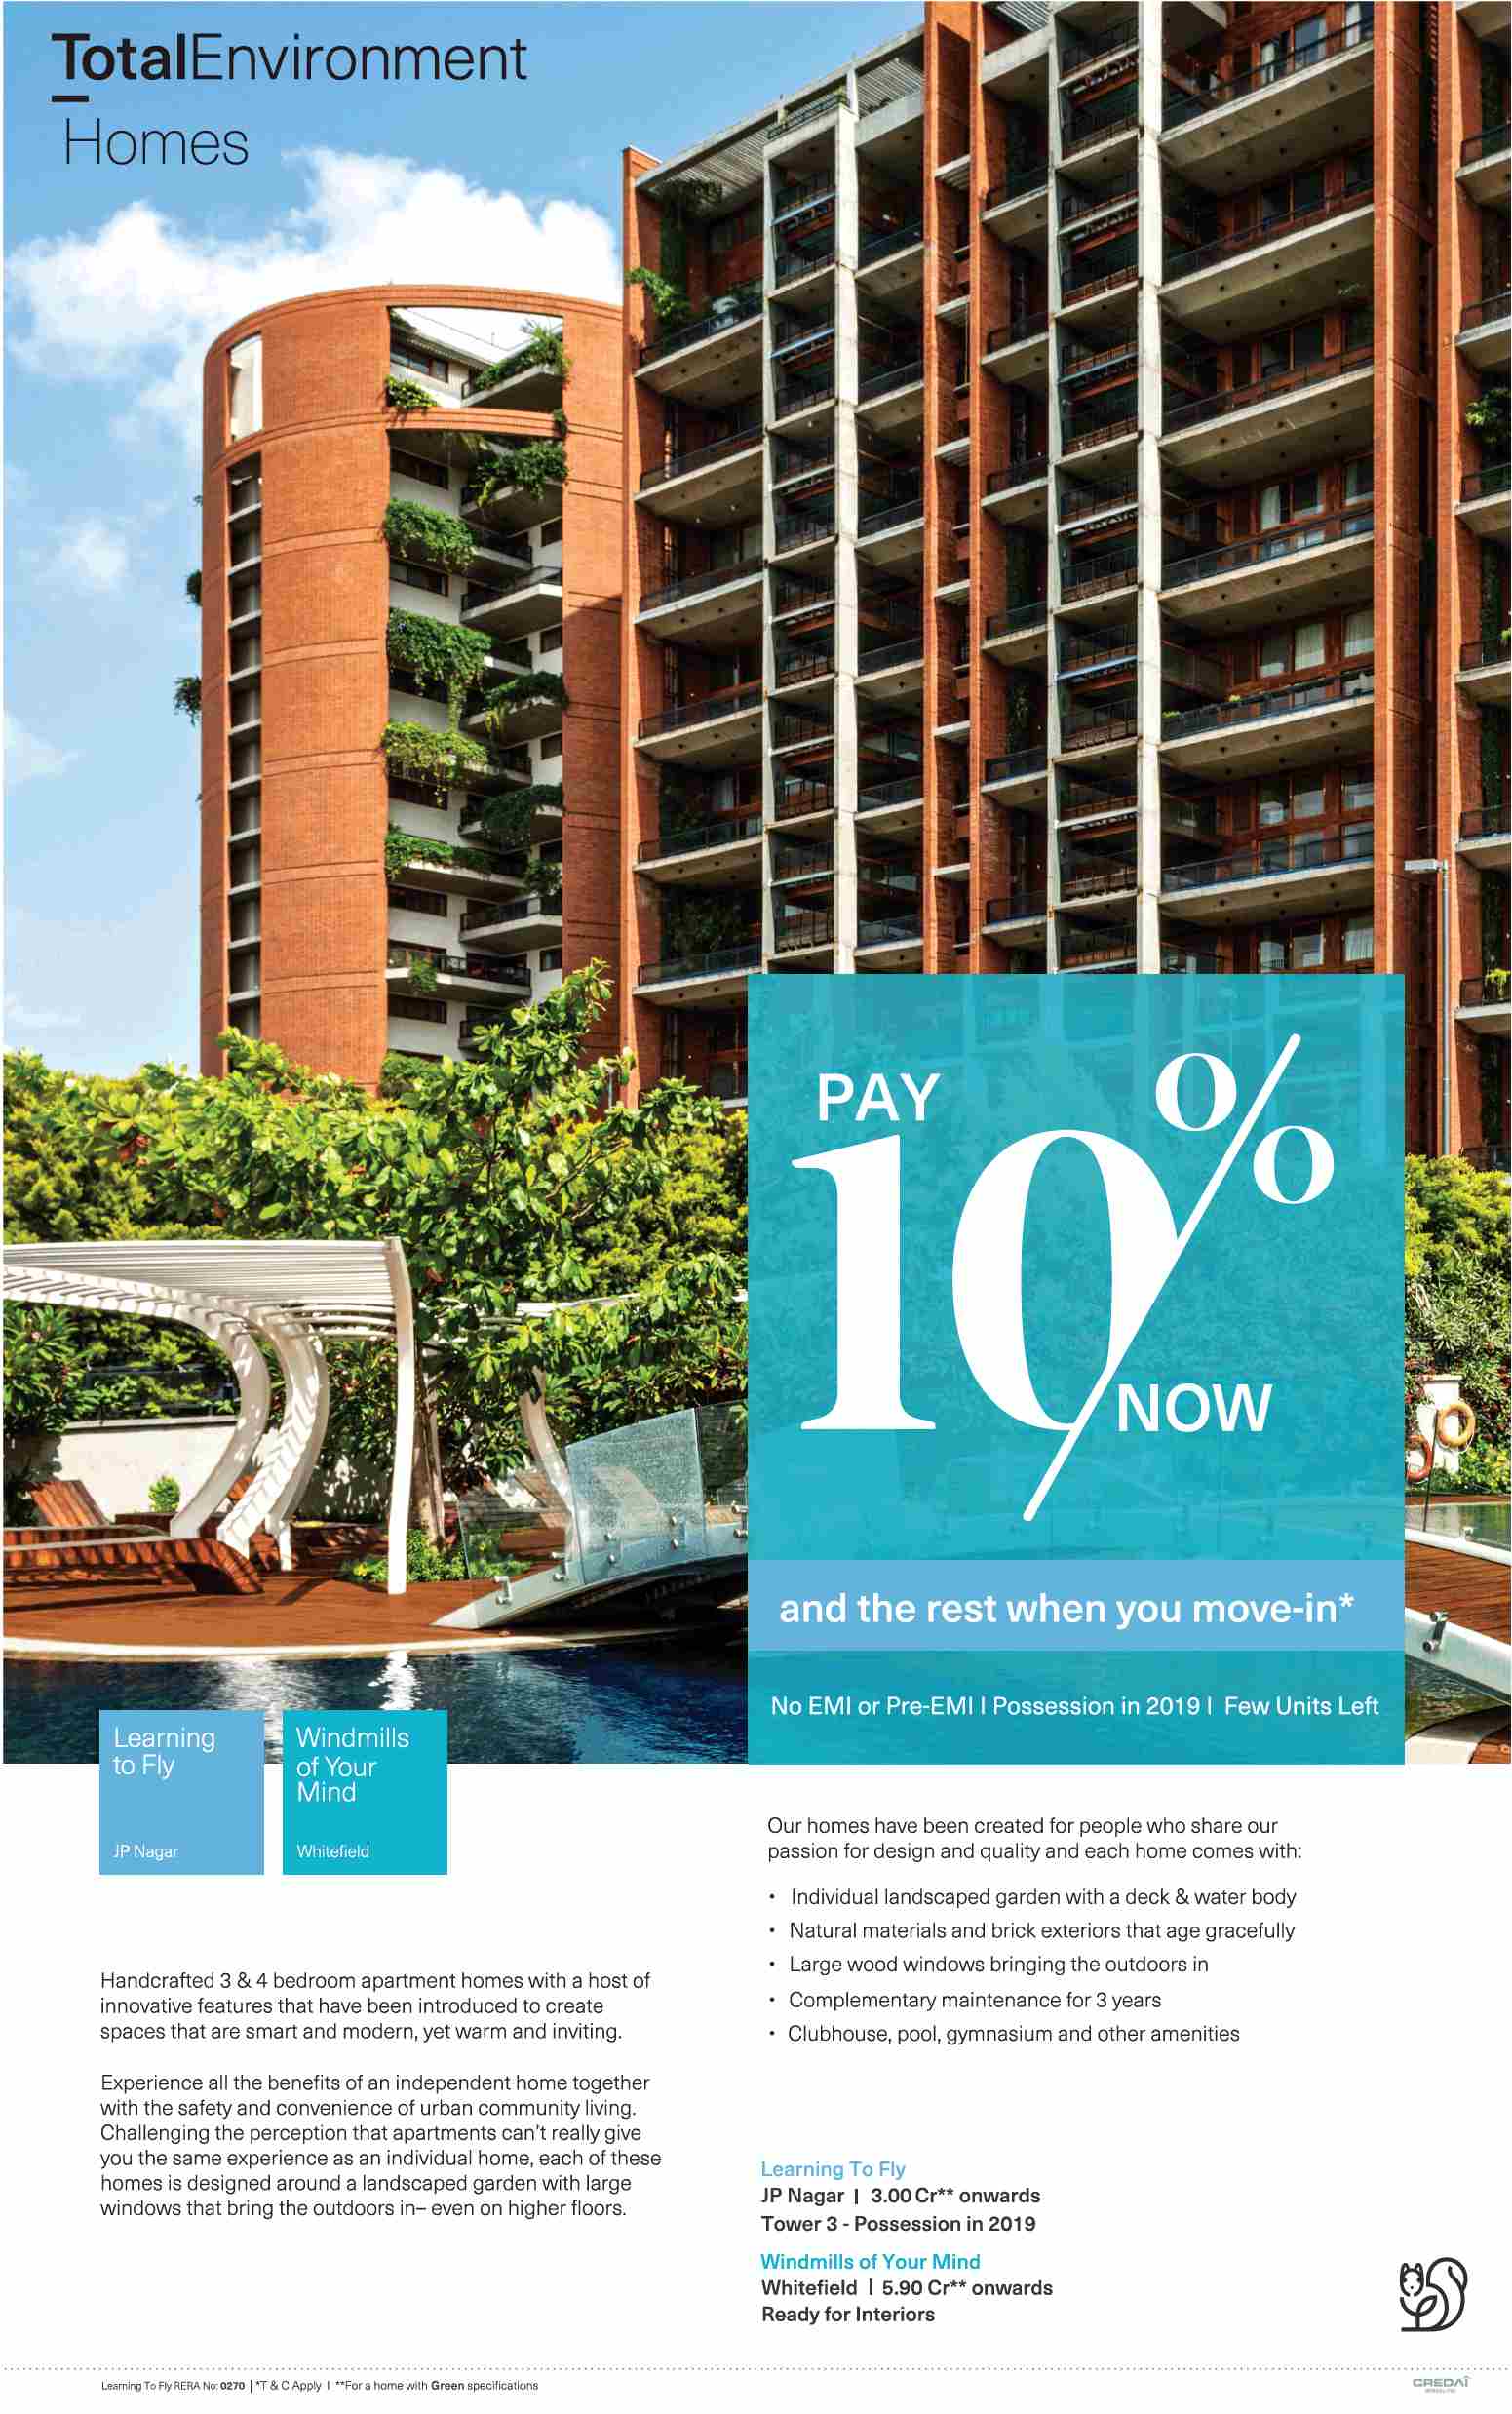 Pay 10% now & the rest when you move-in at Total Environment Homes in Bangalore Update